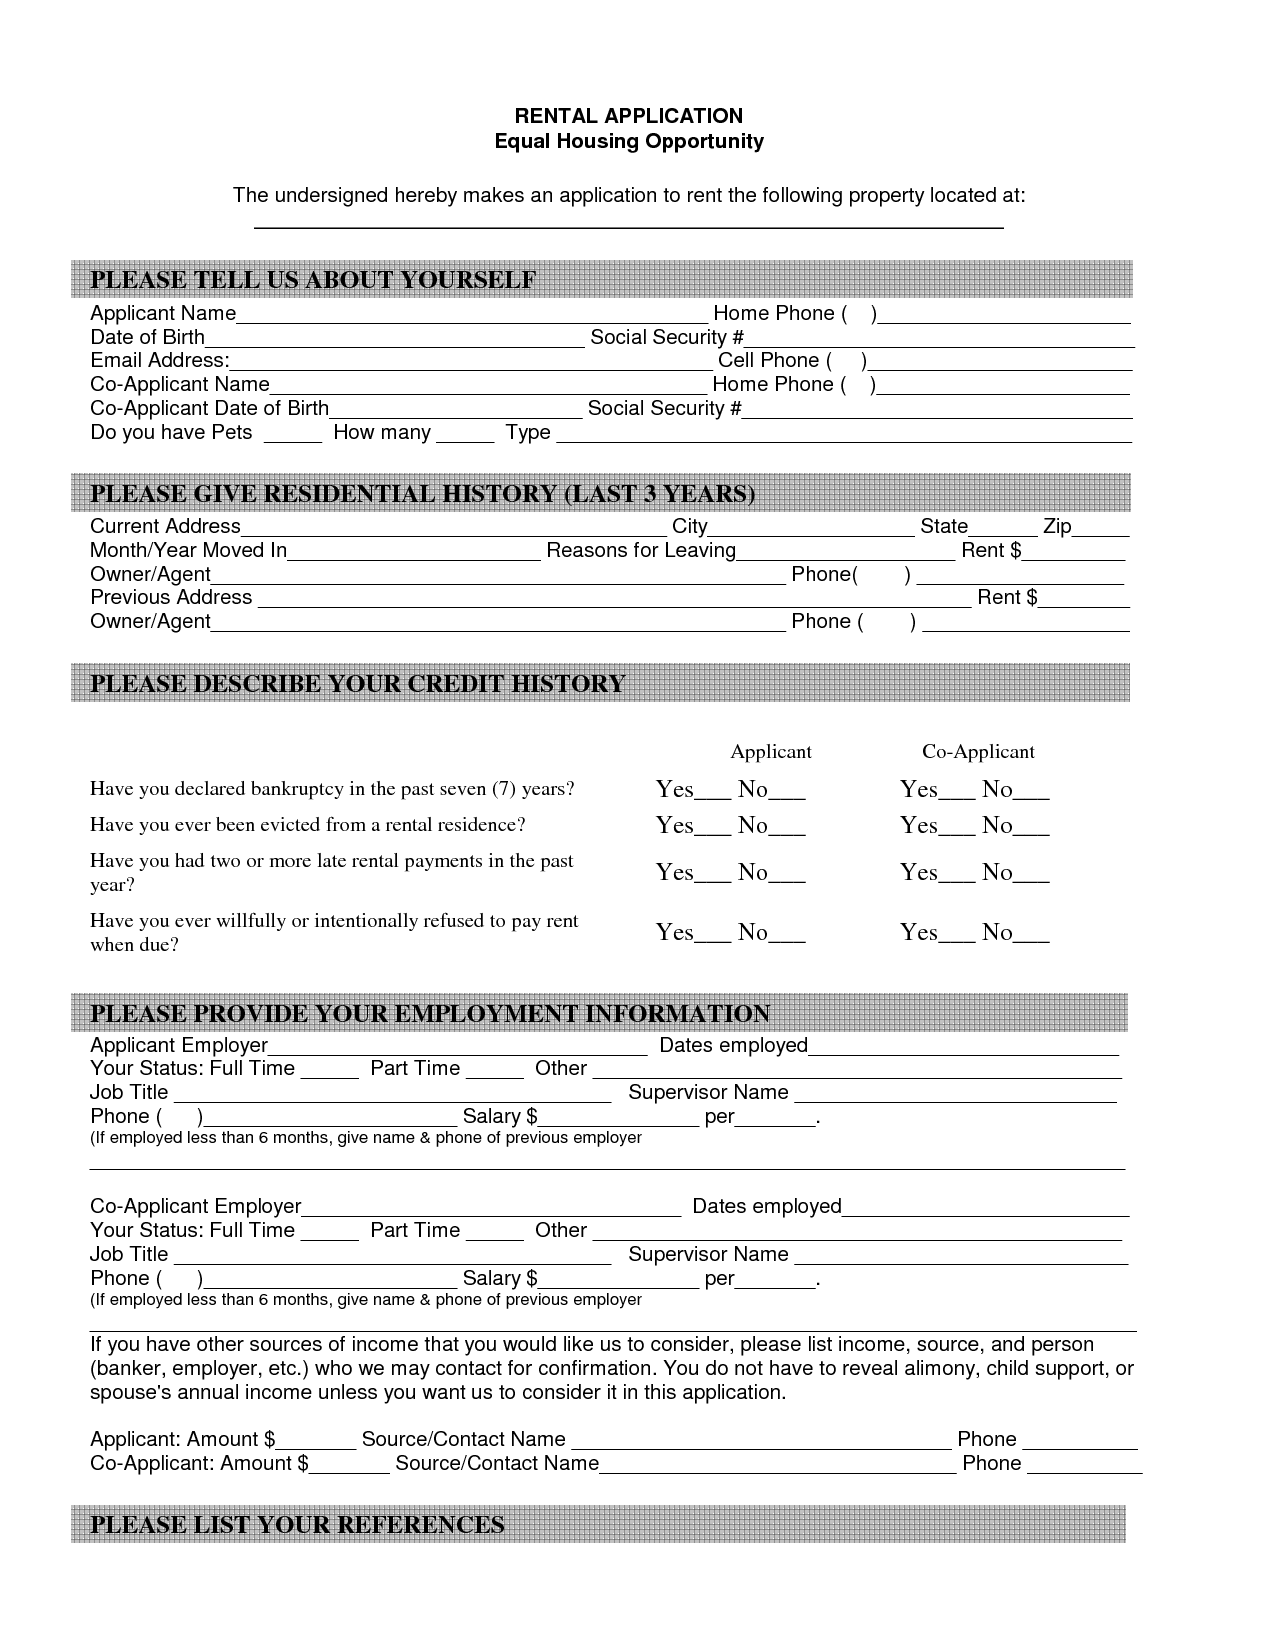 house-rental-application-form-free-printable-documents